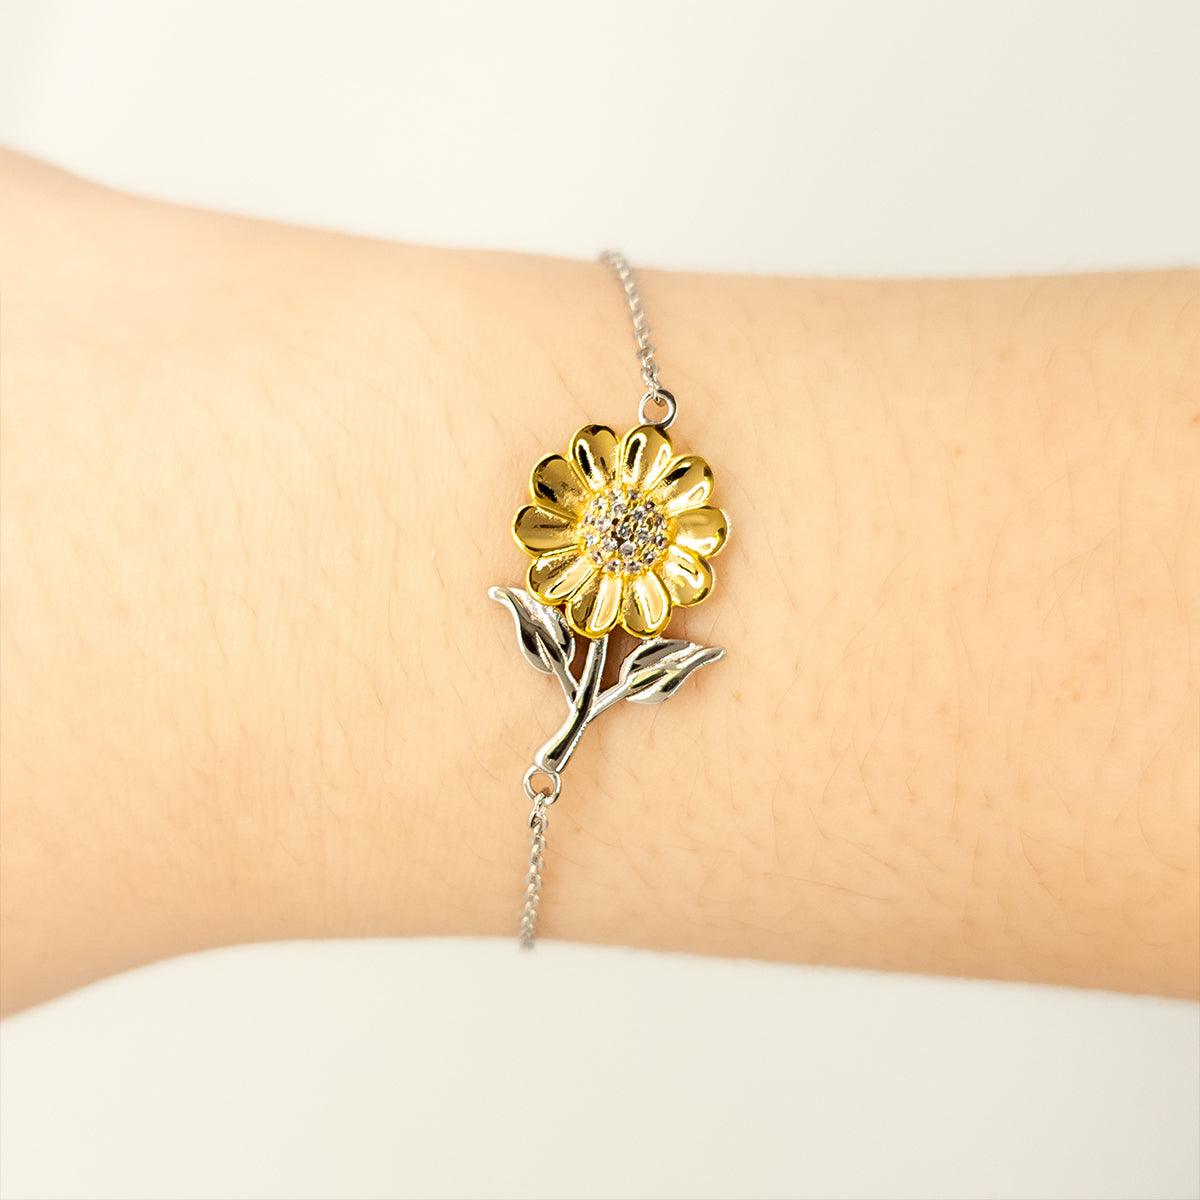 Sarcastic Civil Engineer Sunflower Bracelet Gifts, Christmas Holiday Gifts for Civil Engineer Birthday Message Card, Civil Engineer: Because greatness is woven into the fabric of every day, Coworkers, Friends - Mallard Moon Gift Shop